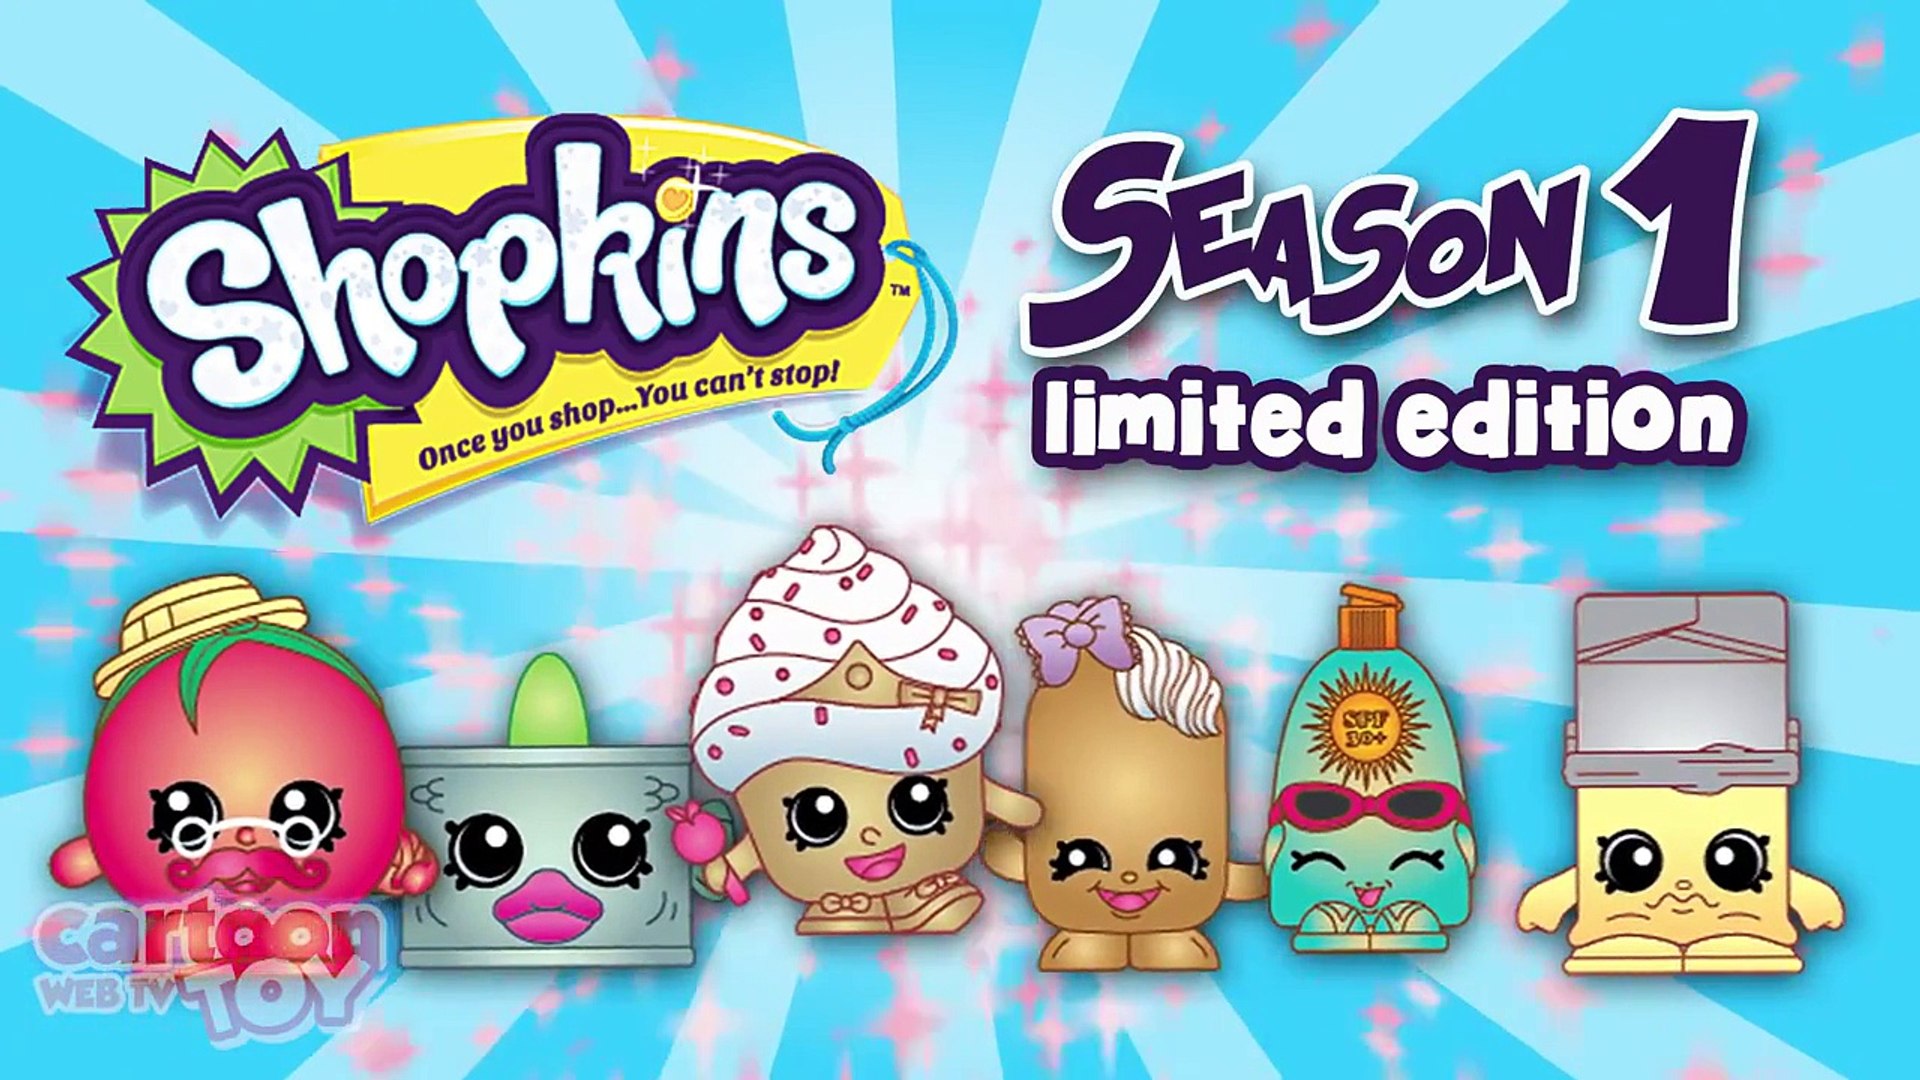 Shopkins Season 1 All Limited Edition Characters by Cartoon Toy WebTV -  Dailymotion Video